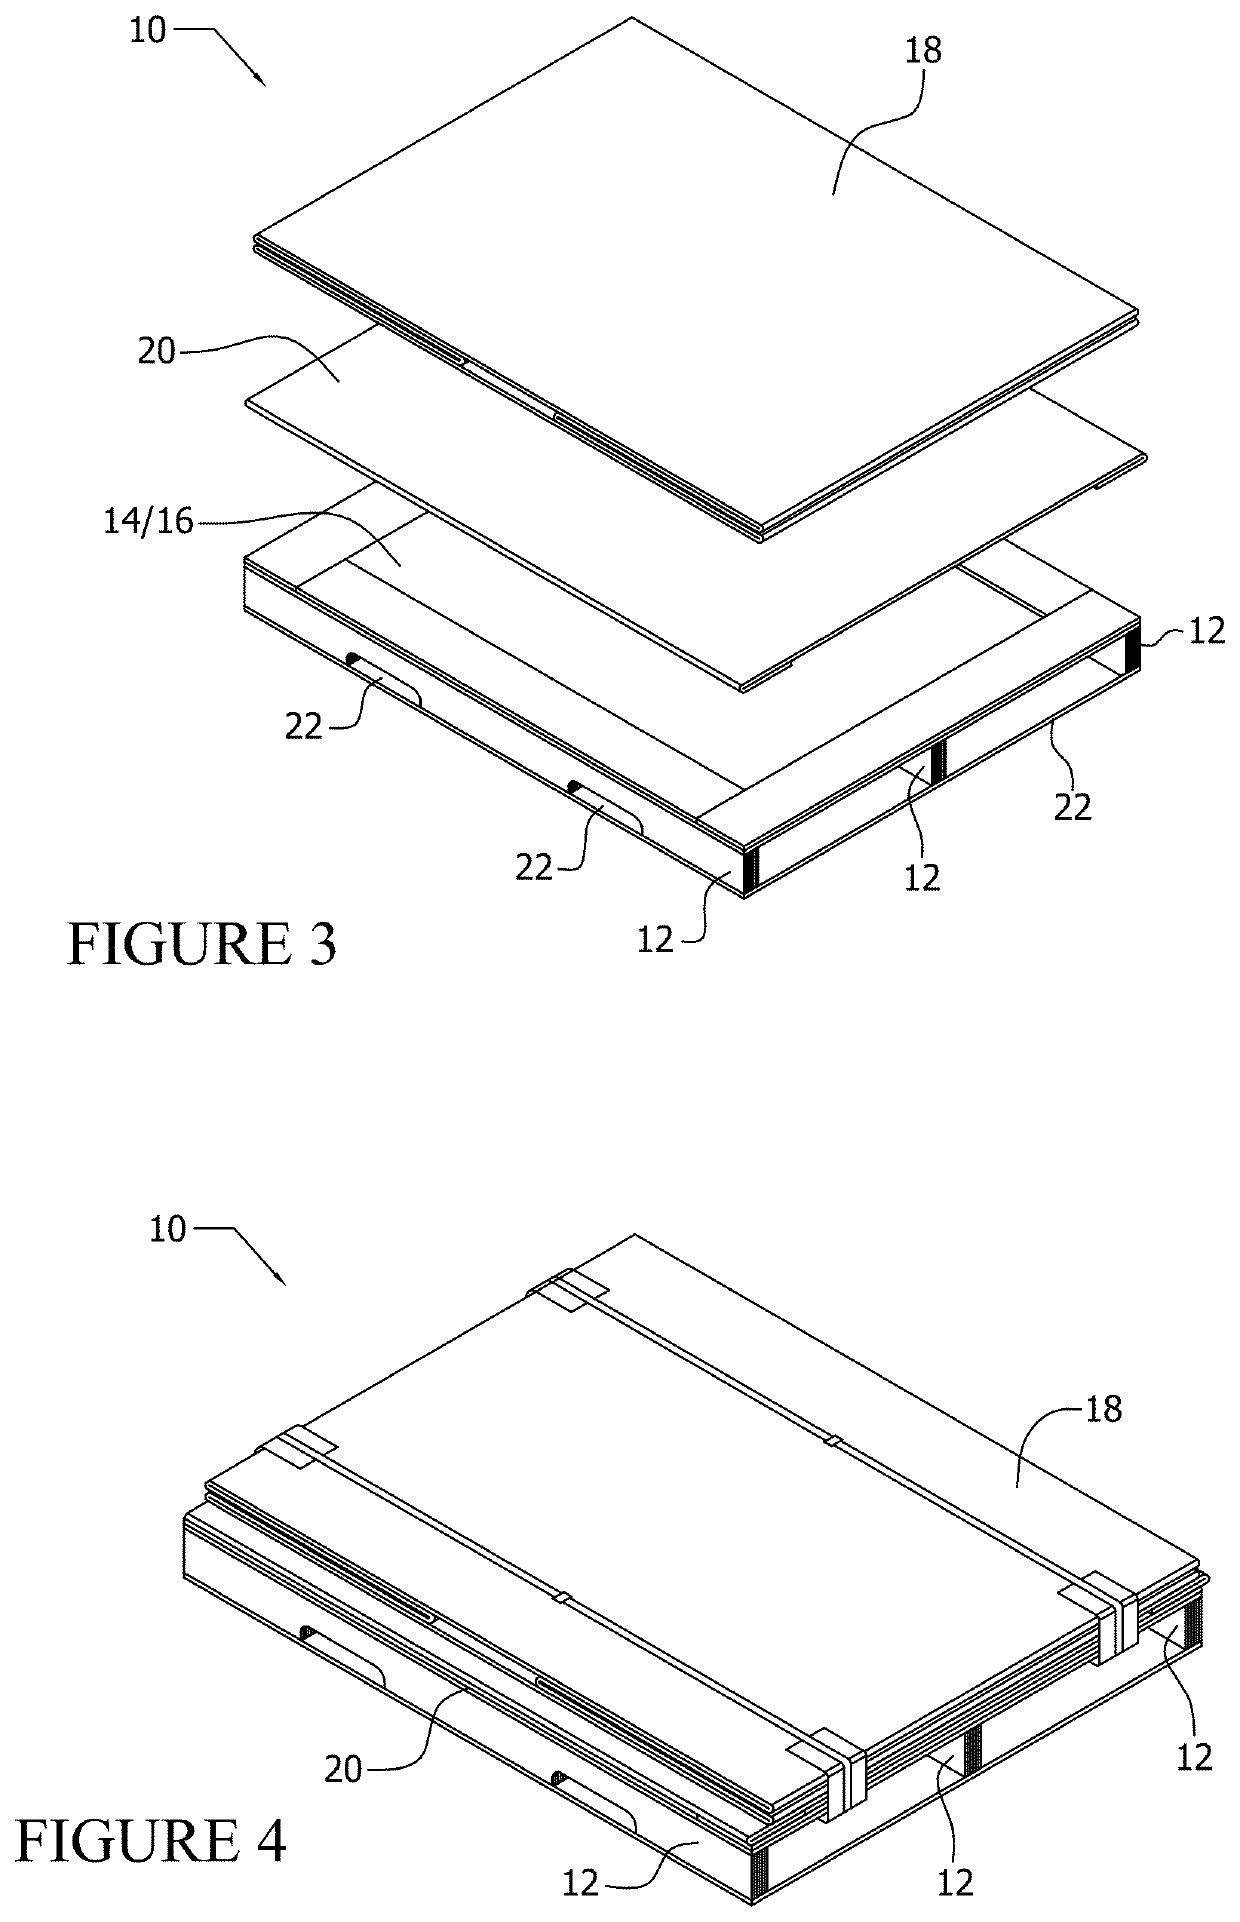 Shipping pallet sleeve system and methods